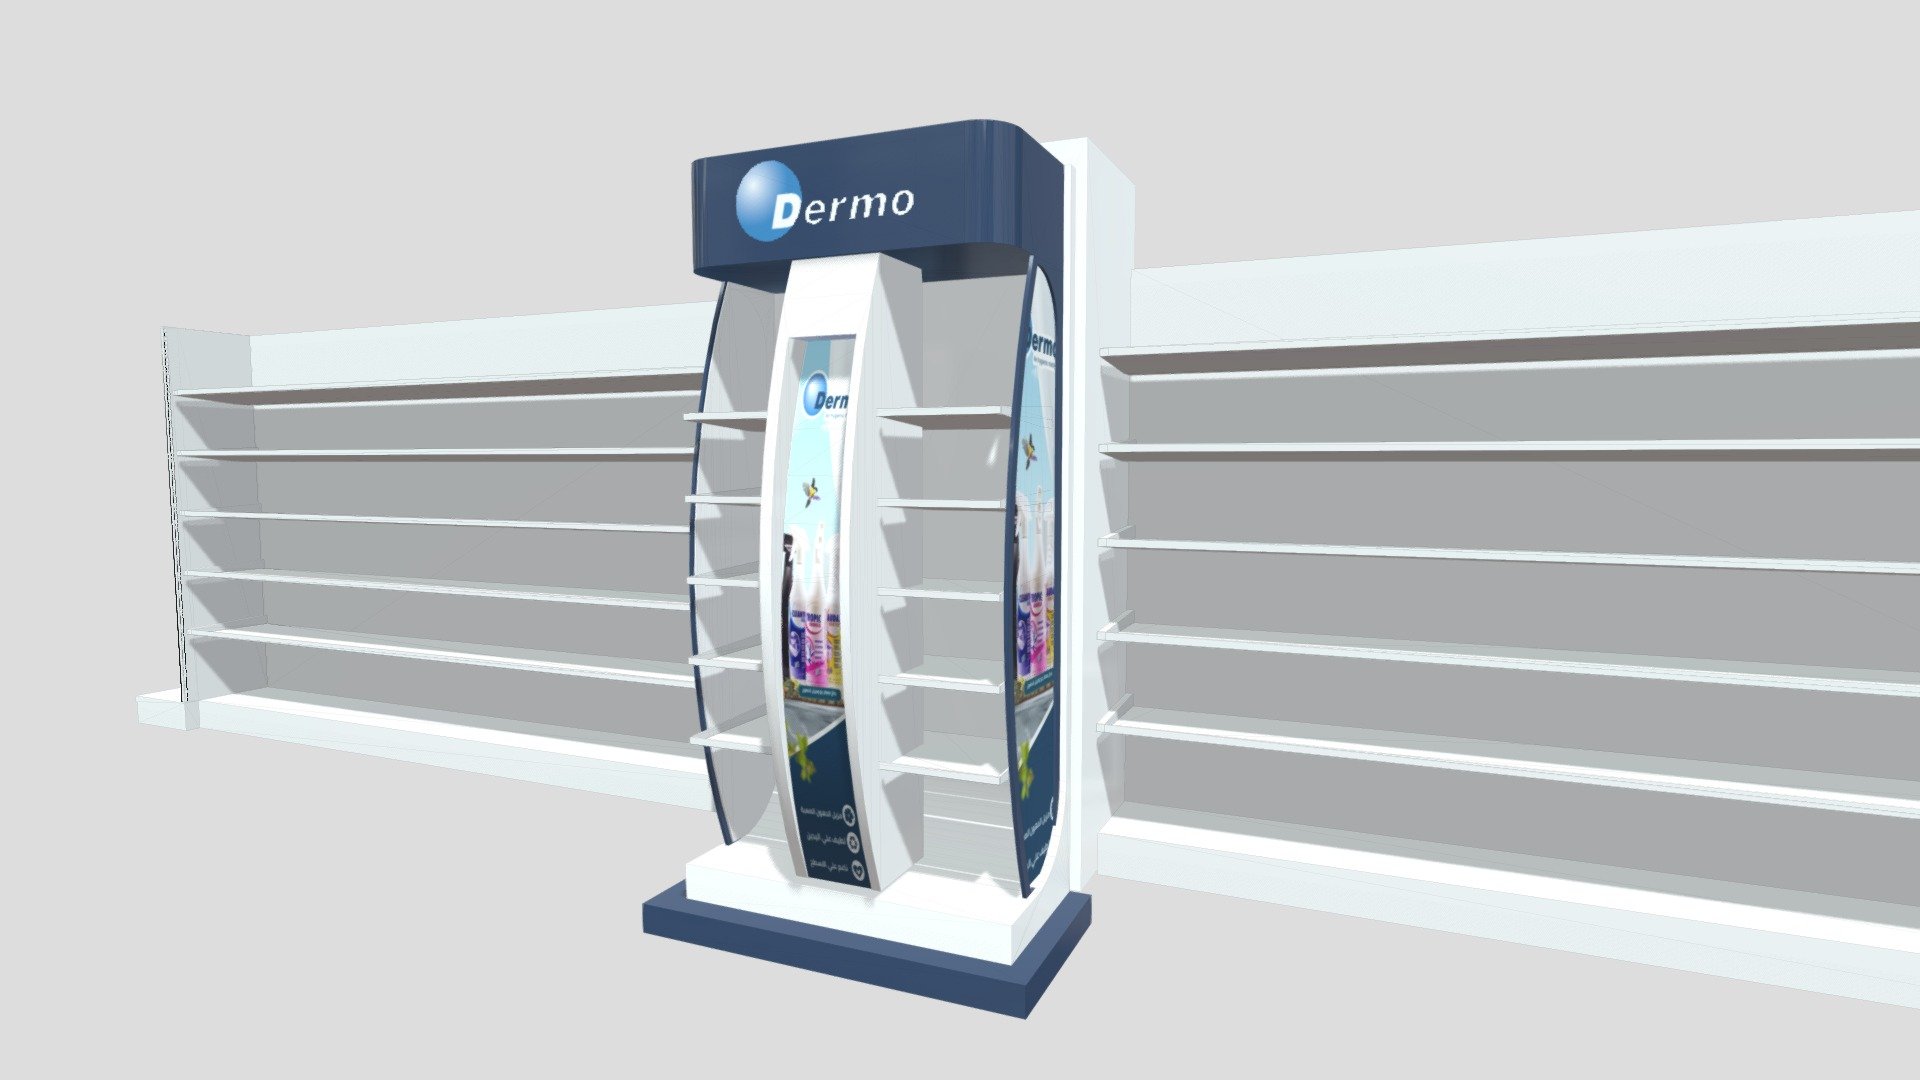 This project is to design that will be used in Supermarket gondola to promotion forDermo Dermo. and to give it a catching design inside the market - Dermo Promo Stand Design - 3D model by raofnaaji 3d model